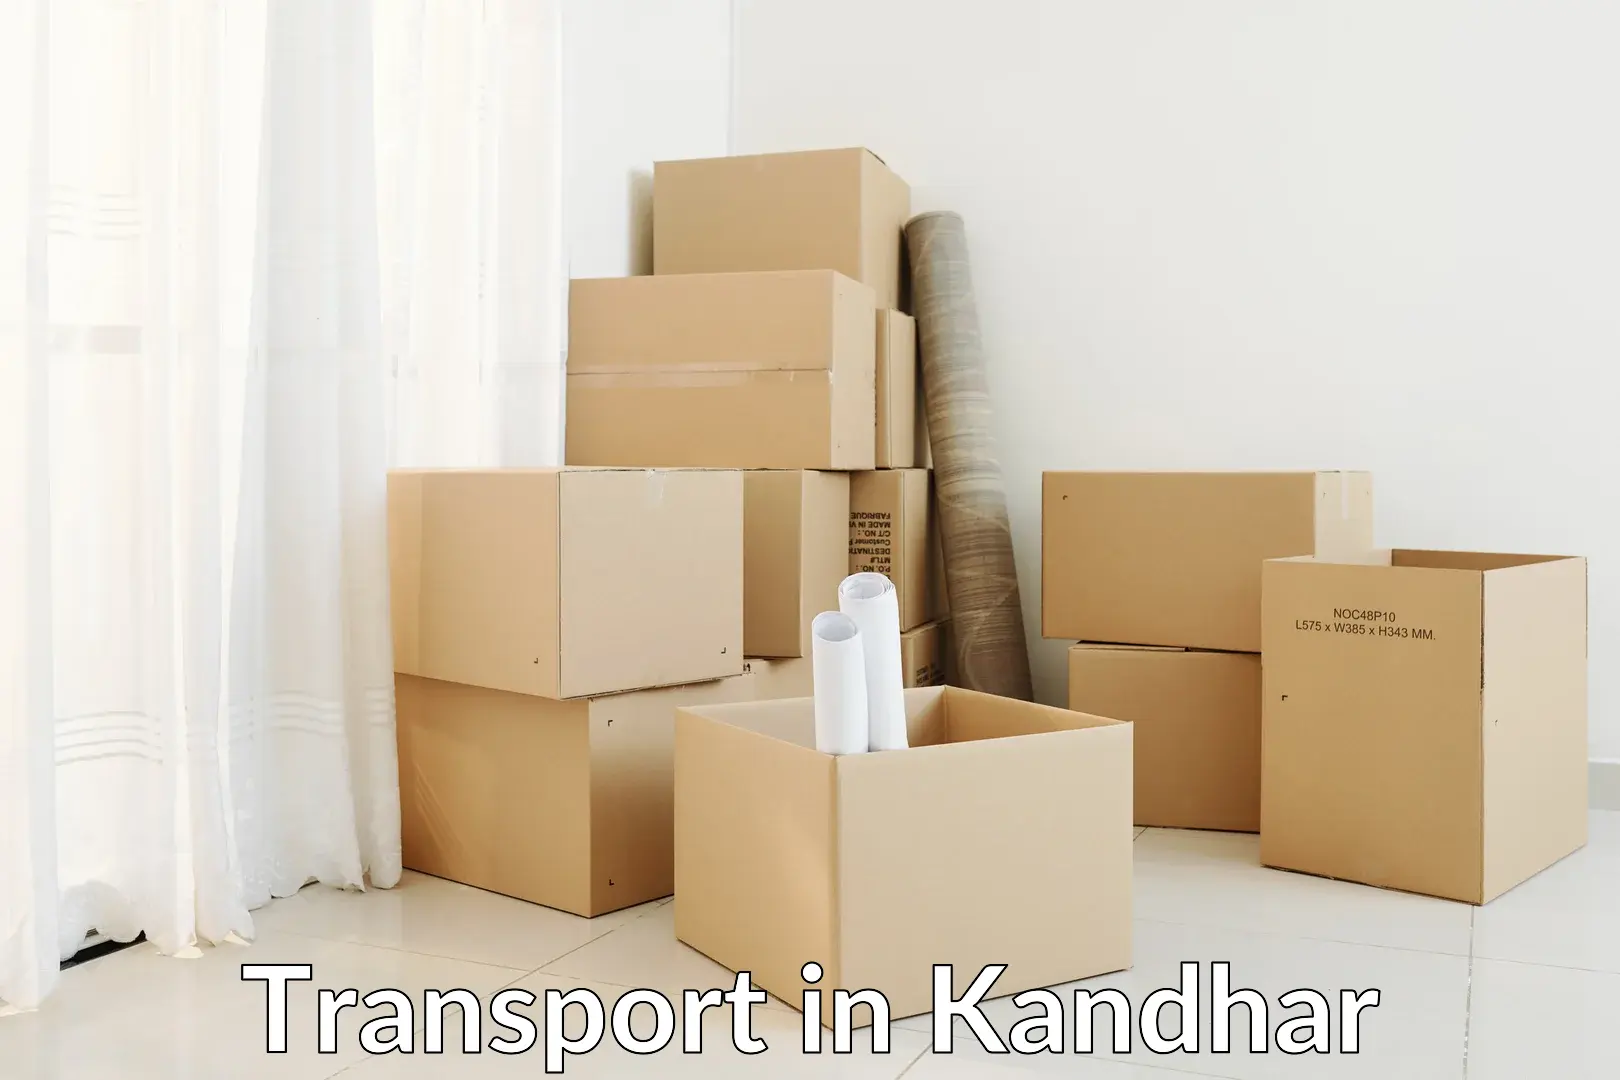 Container transportation services in Kandhar